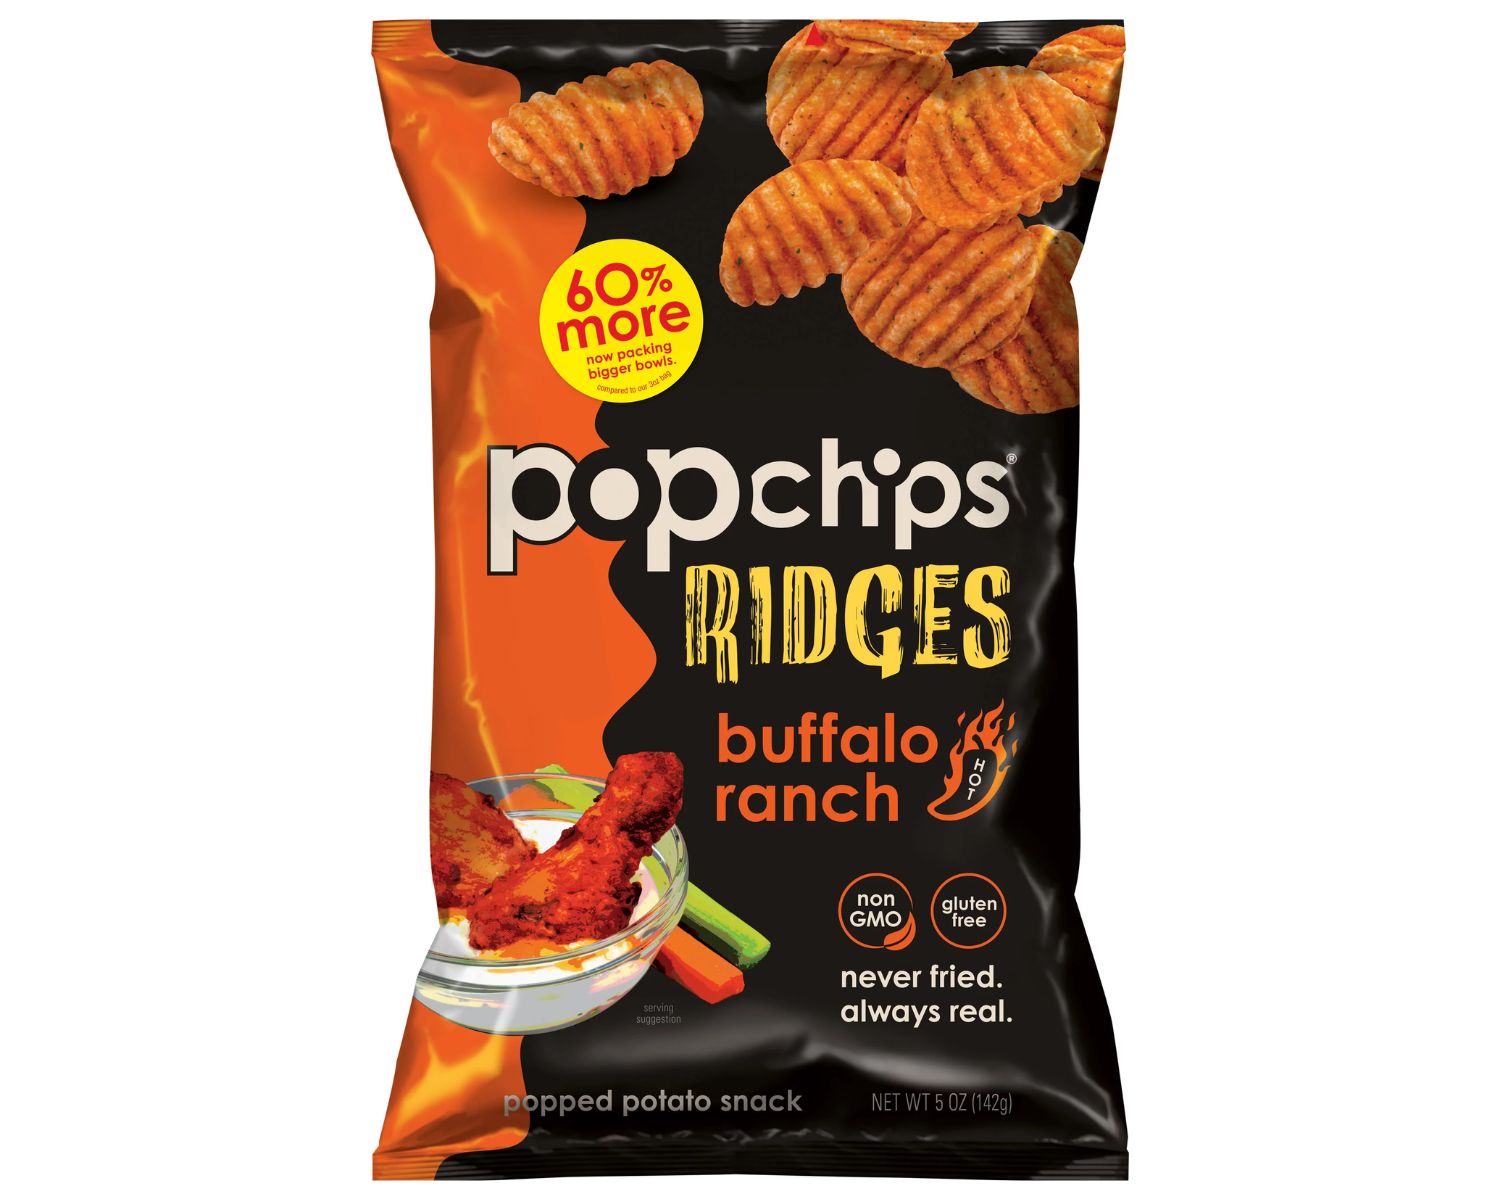 11-popchips-nutrition-facts